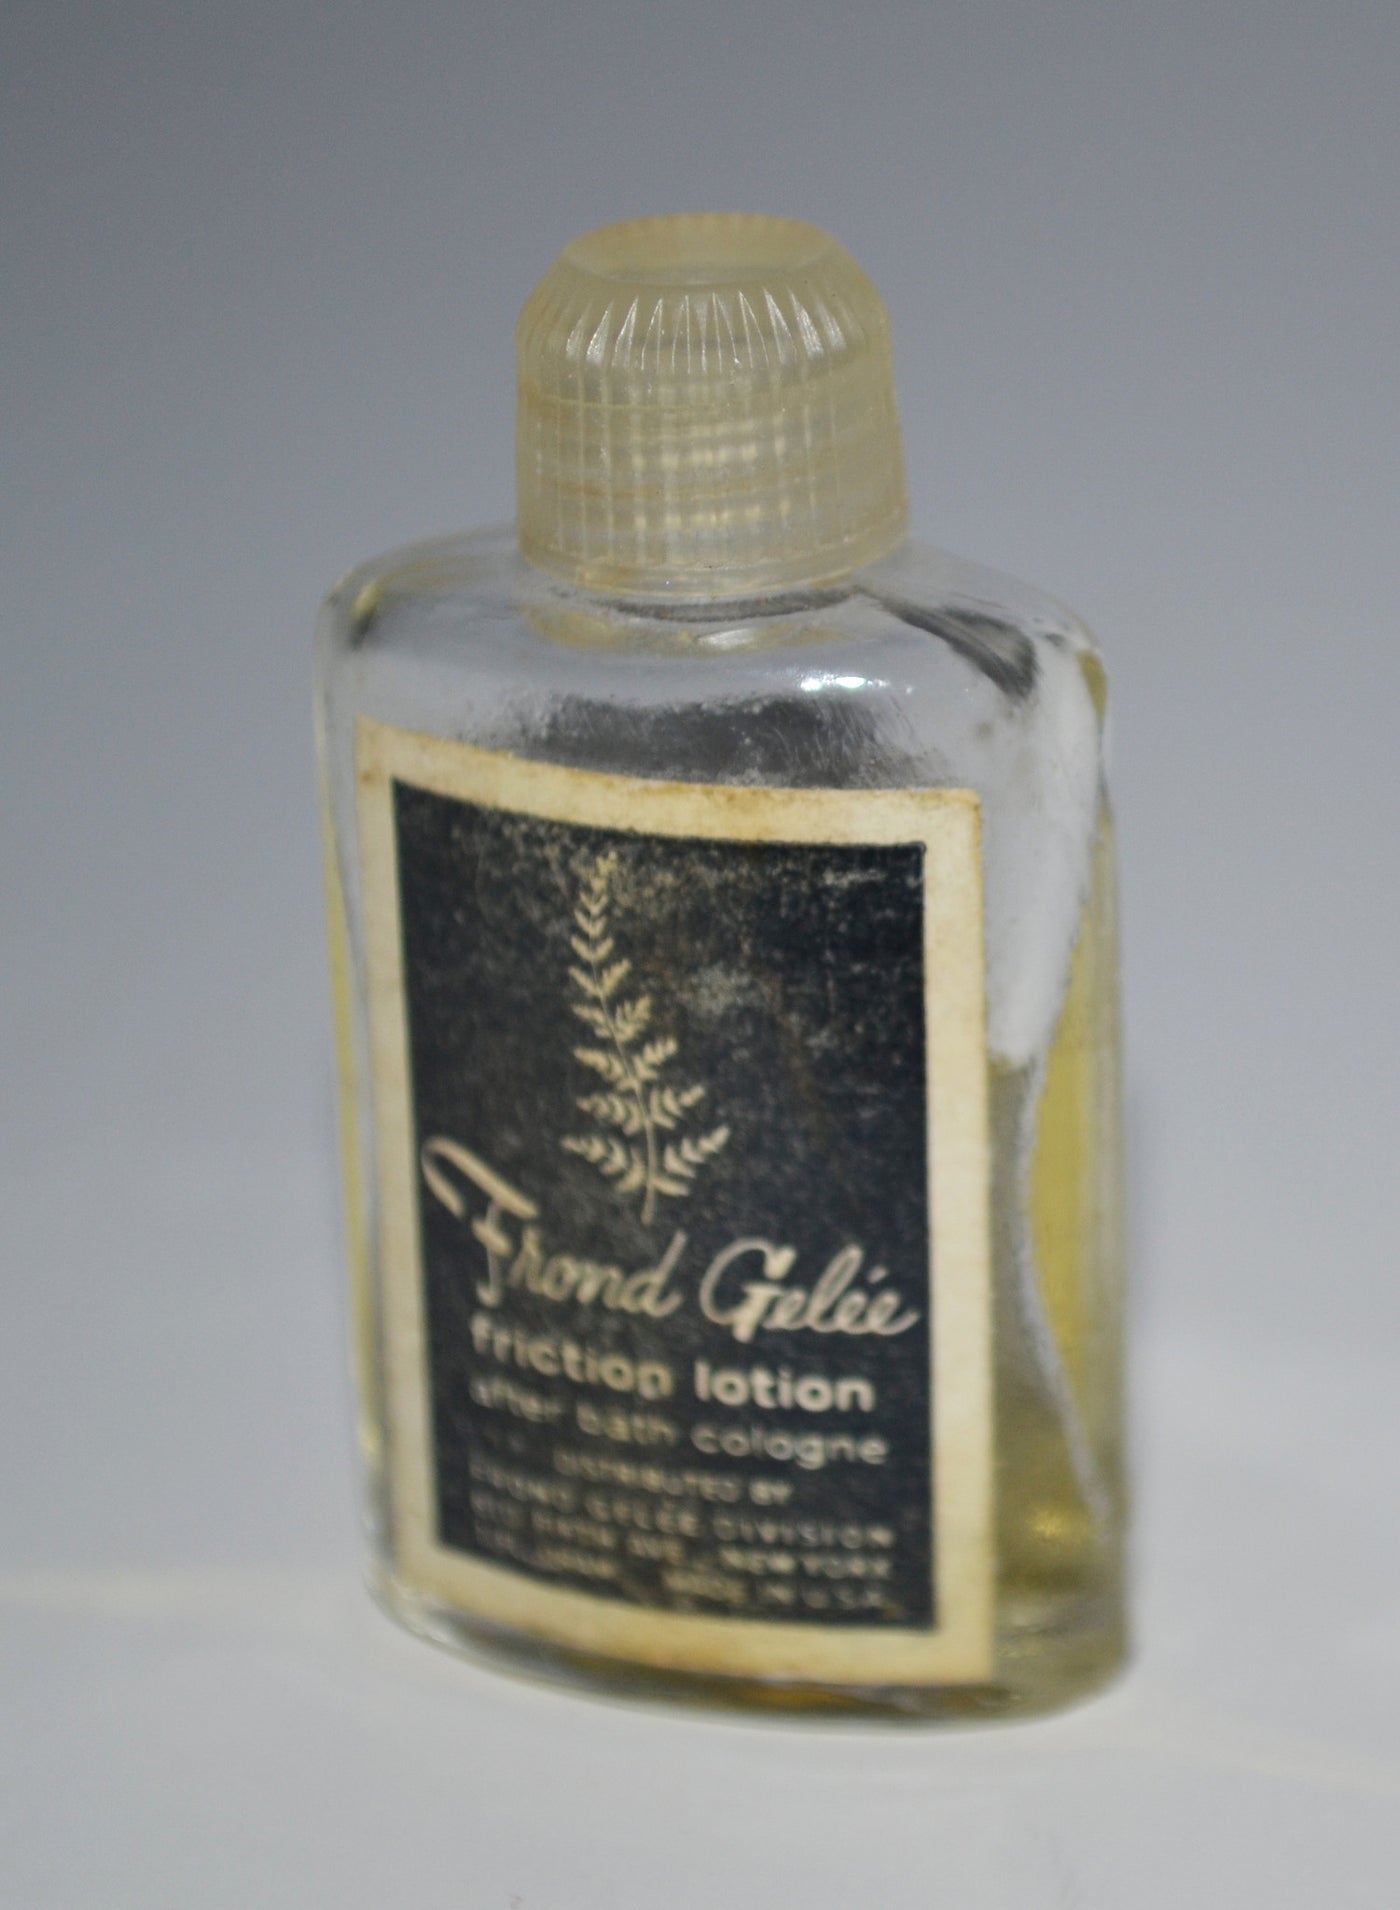 Frond Gelee Friction Lotion